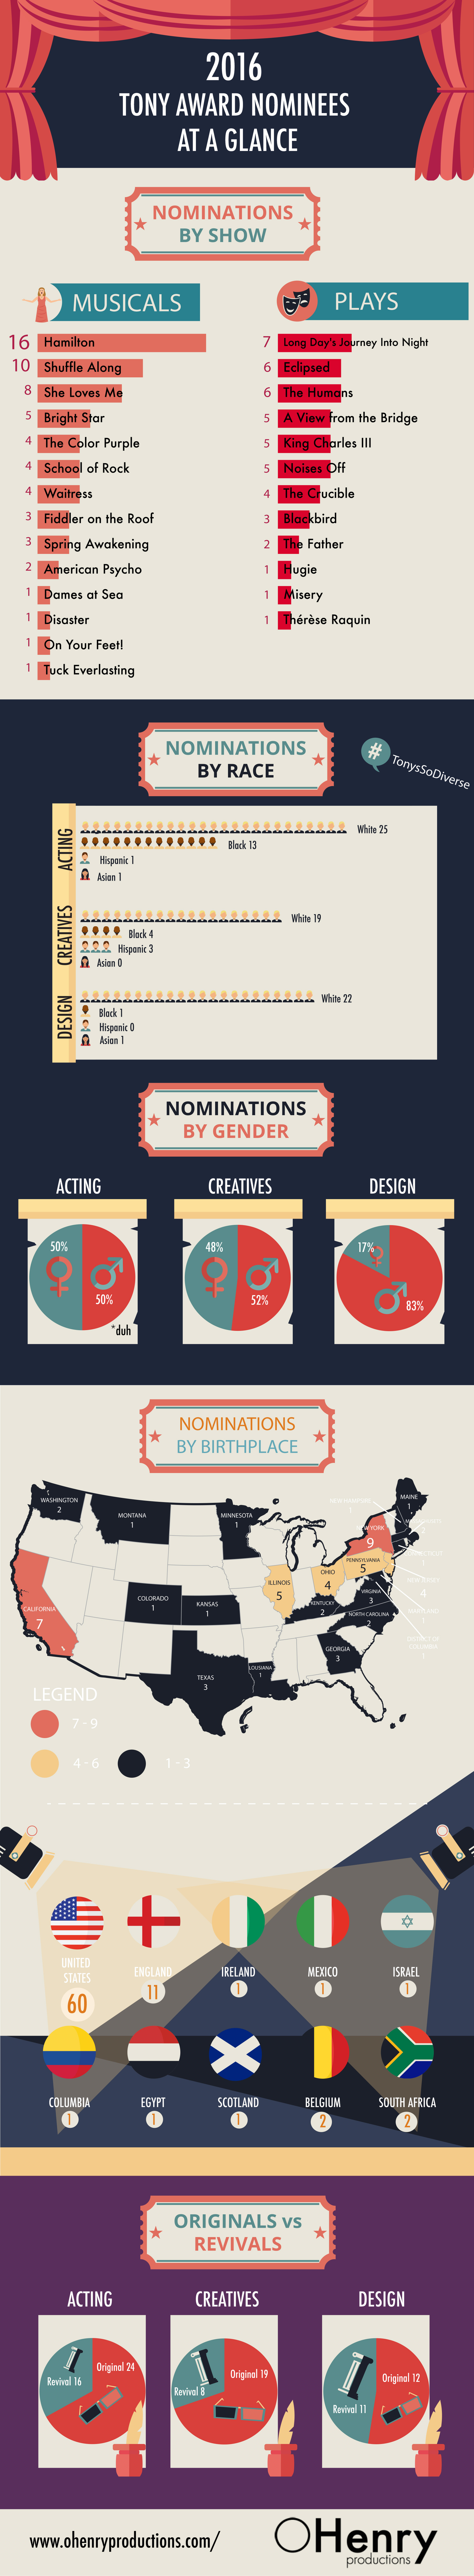 Tony Awards 2016 Demographics of the Nominees Infographic